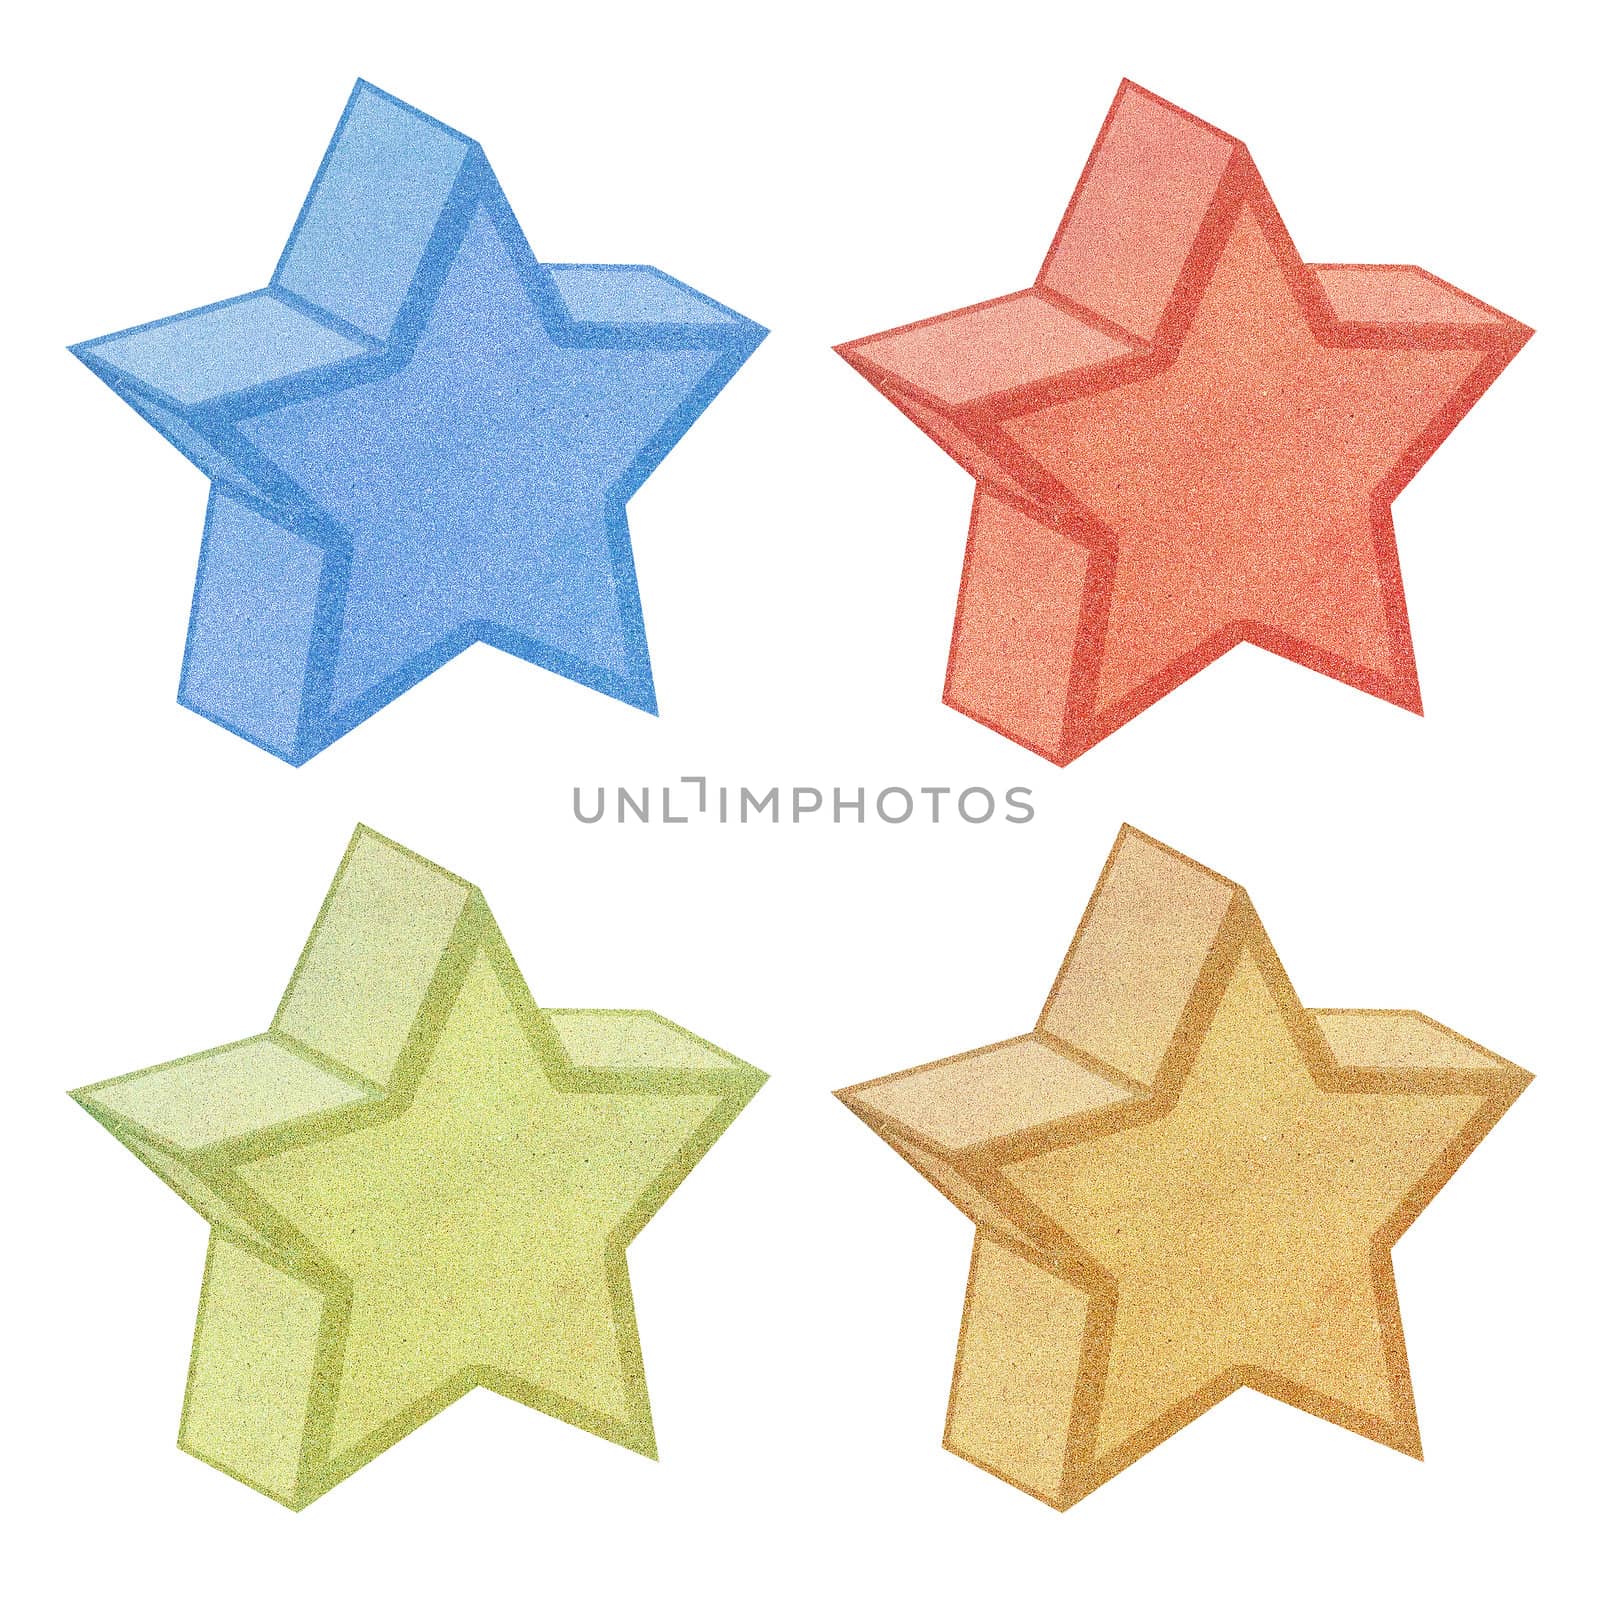 Paper texture,3D Star recycled paper on white background